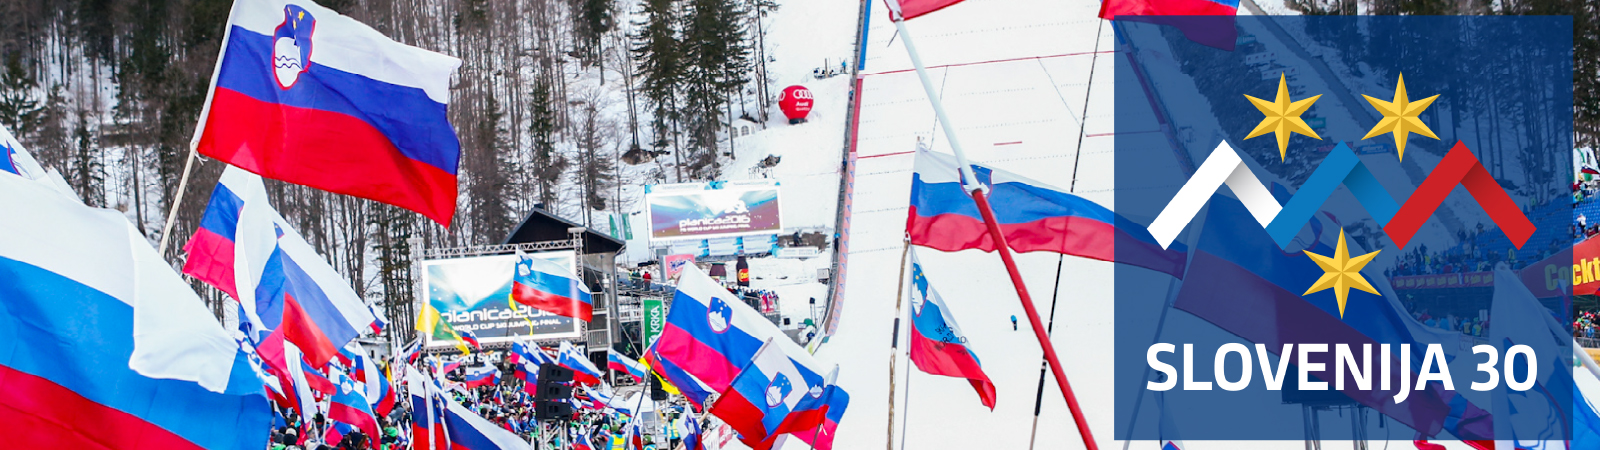 The audience in the snowy Planica holds the Slovenian flags.